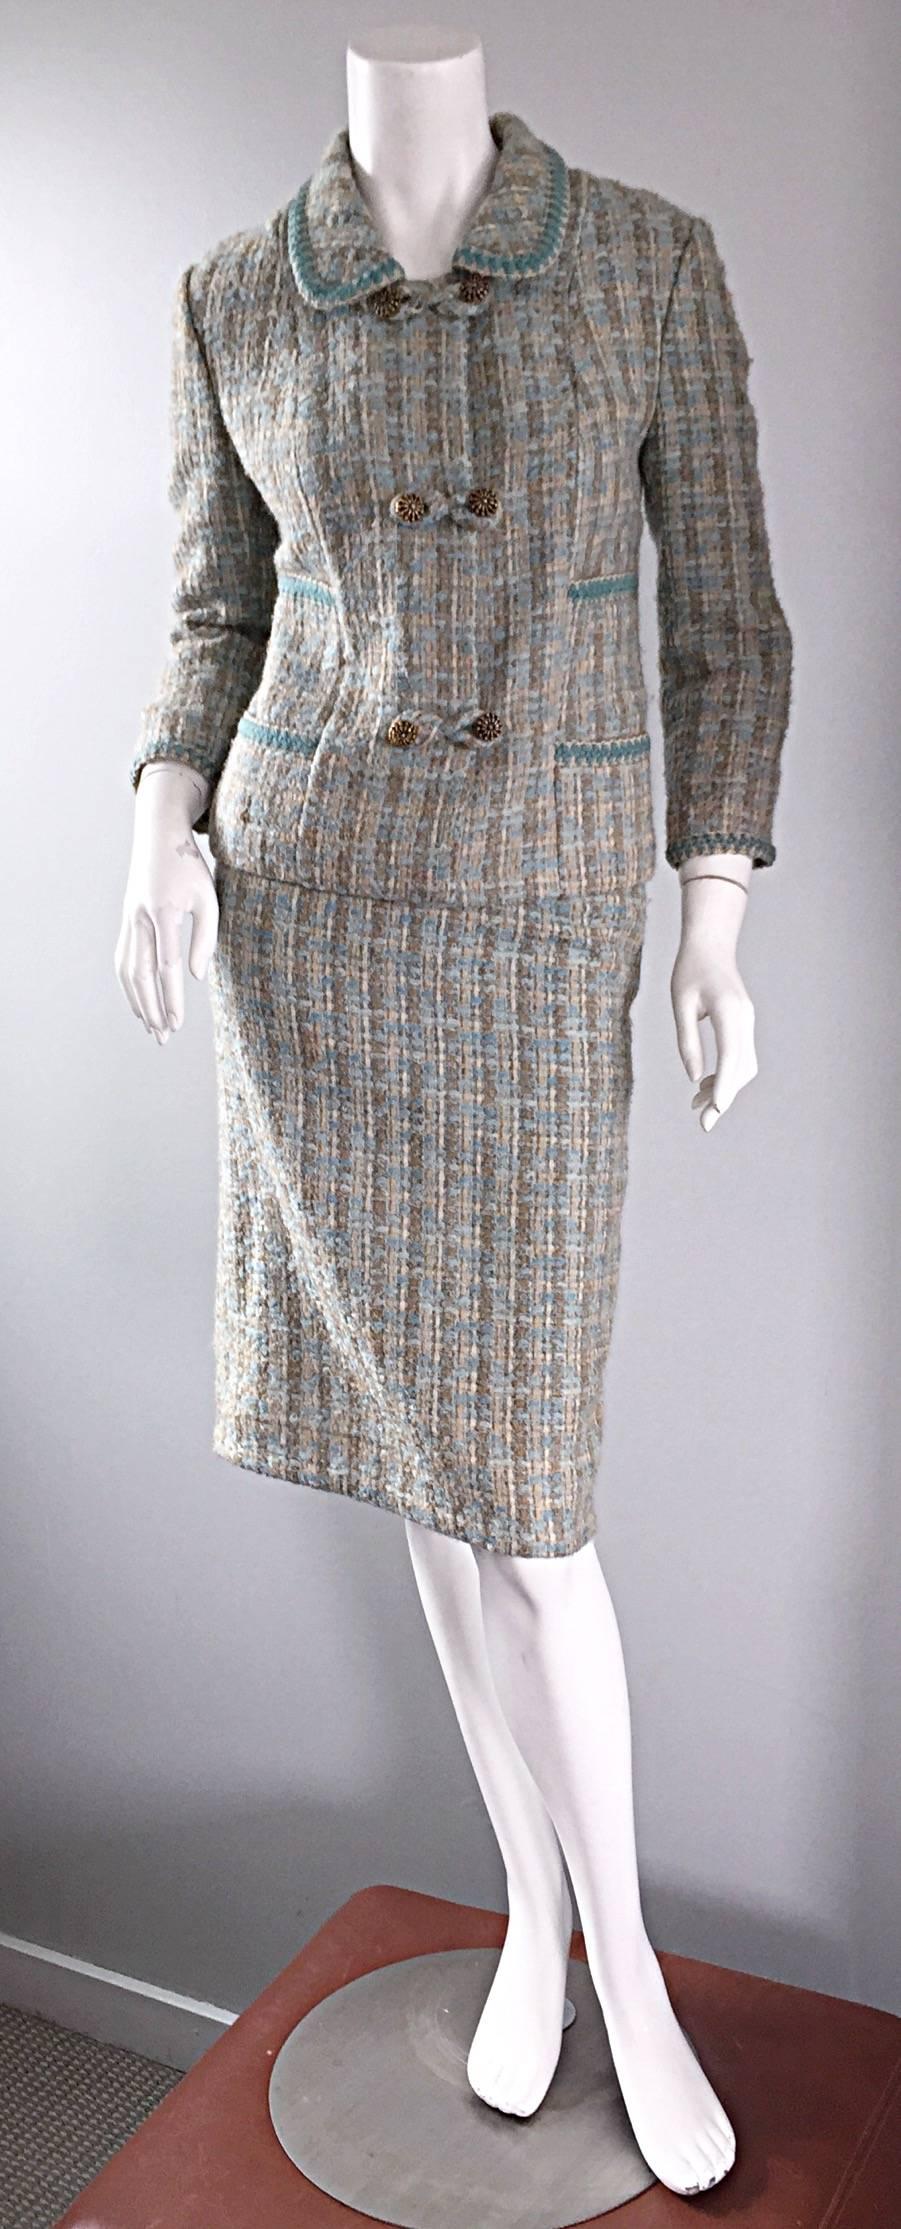 Chic vintage 1960s ROTH-LE COVER of California pale aqua blue and tan / beige wool tweed skirt and jacket suit! Effortlessly chic, with a Jackie Onasis vibe. Wonderful tailored fit. Two pockets at each side of the waist. Decorative brass buttons up